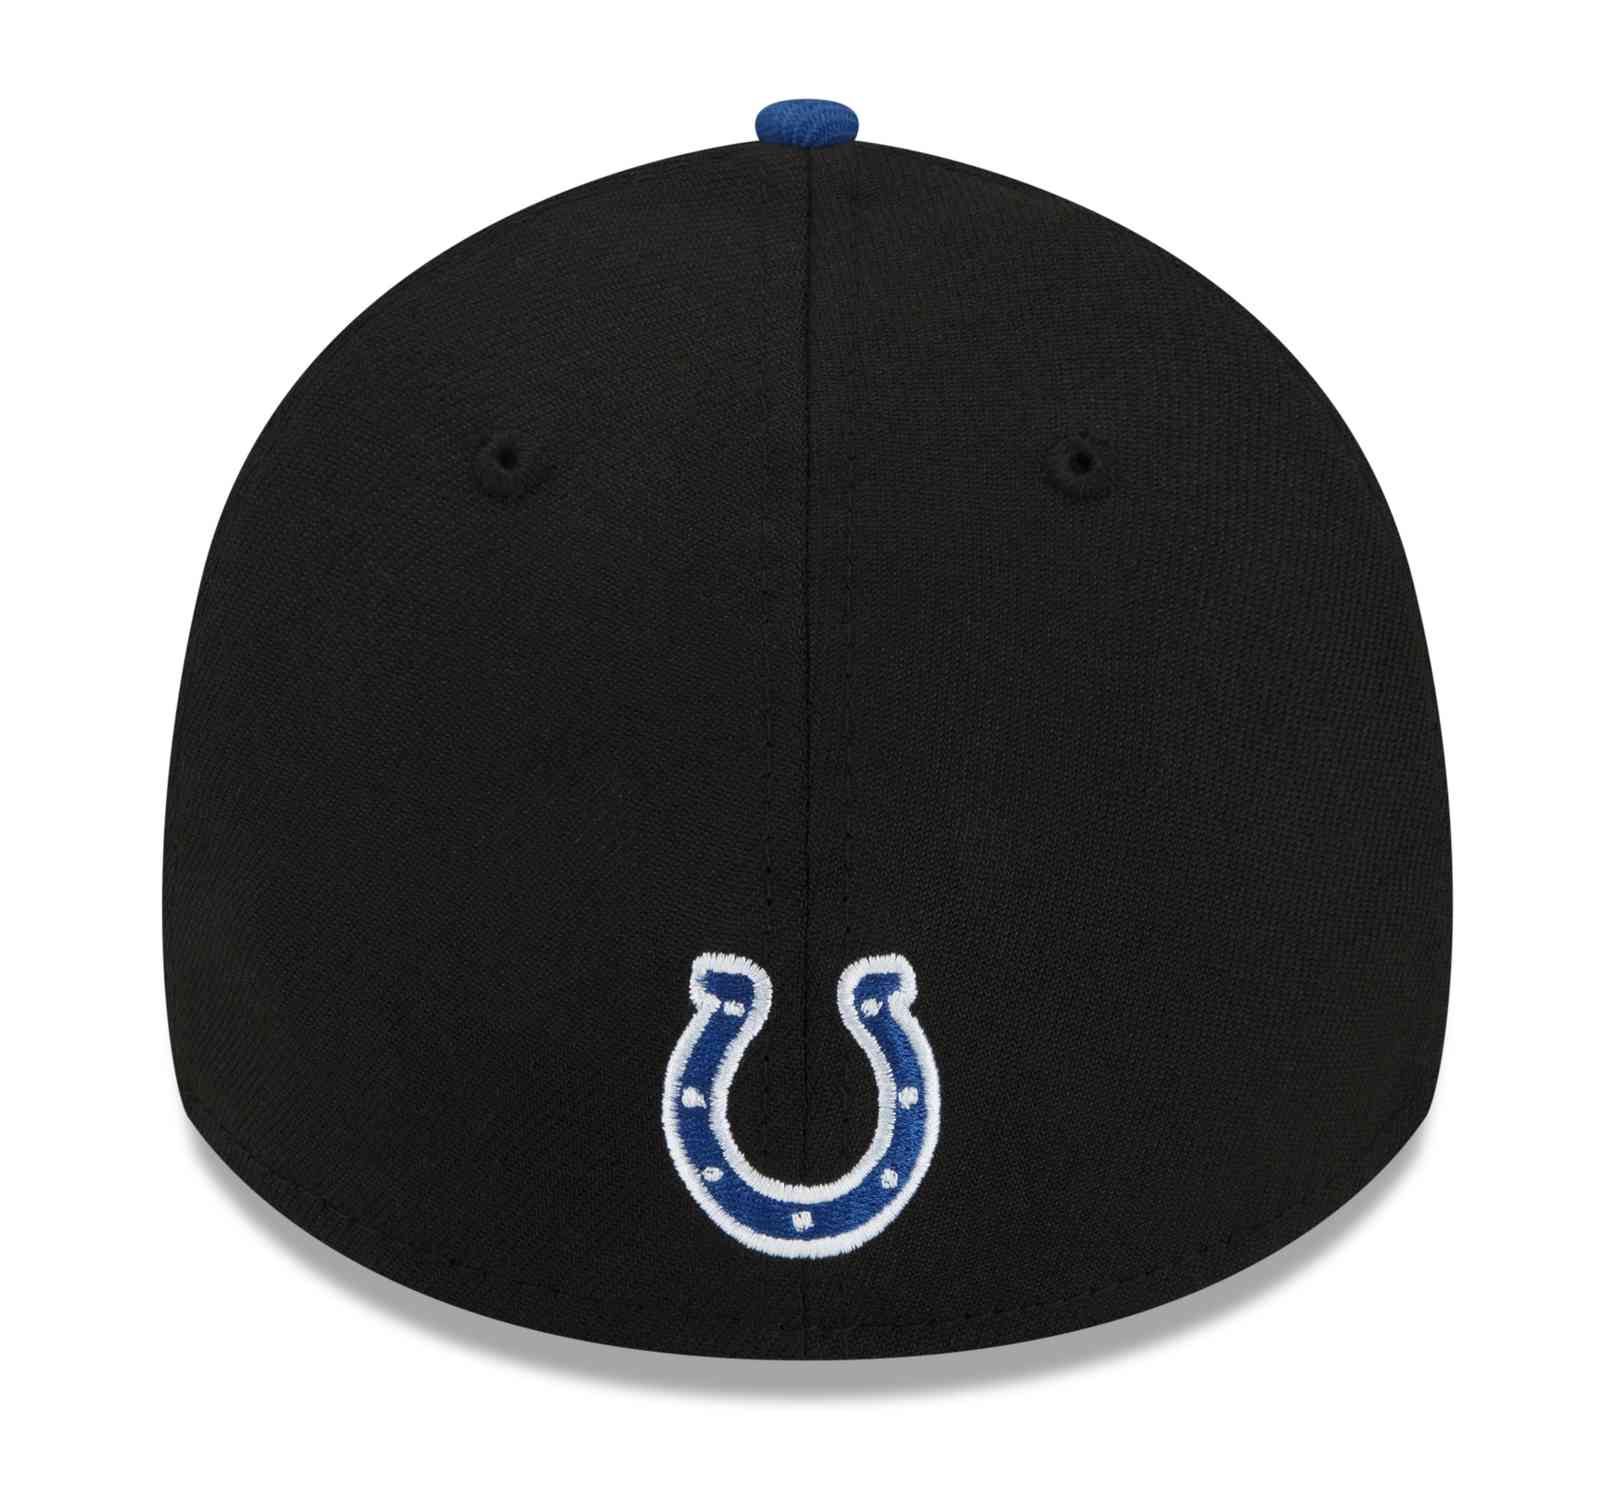 New Era - NFL Indianapolis Colts 2022 Draft 39Thirty Stretch Cap